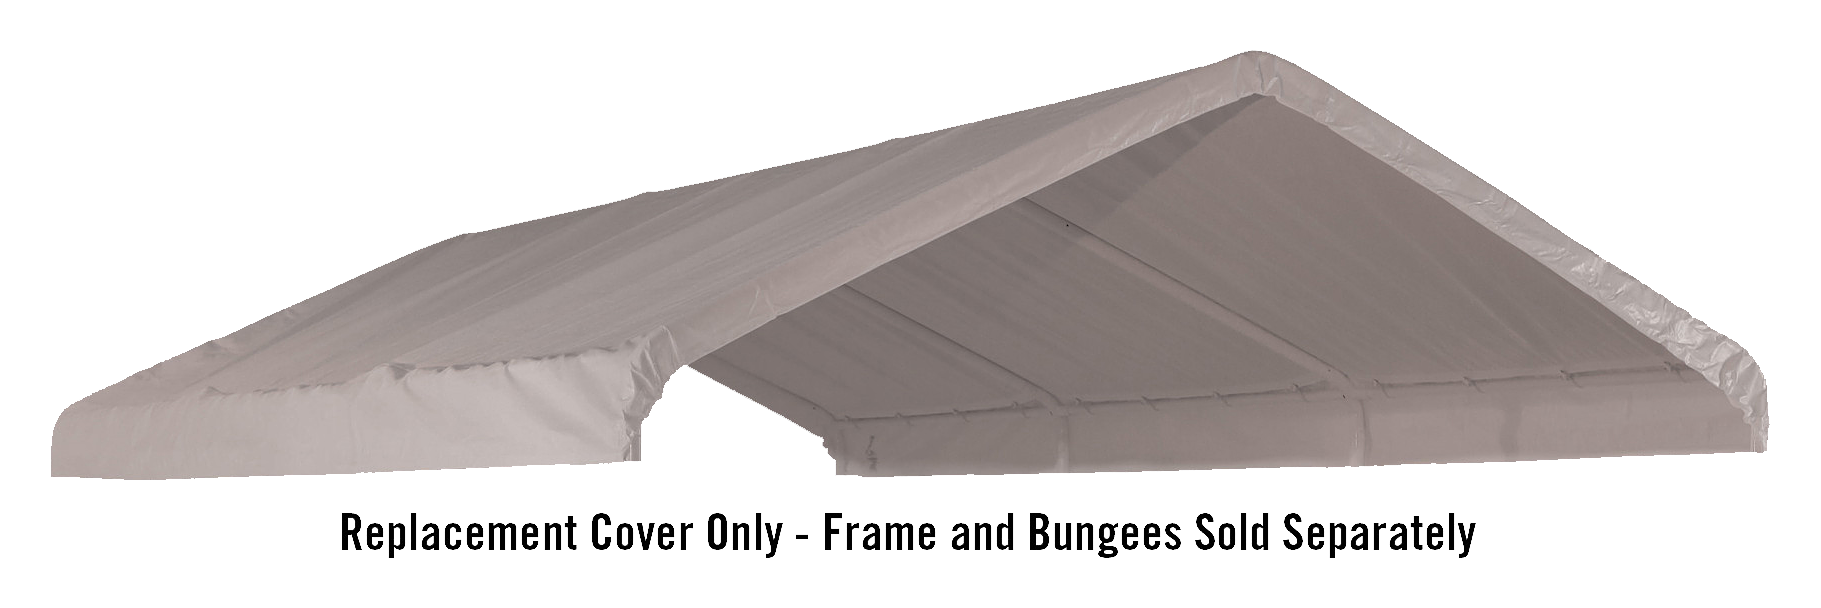 ShelterLogic Max AP Replacement Cover for 10' x 20' Canopy